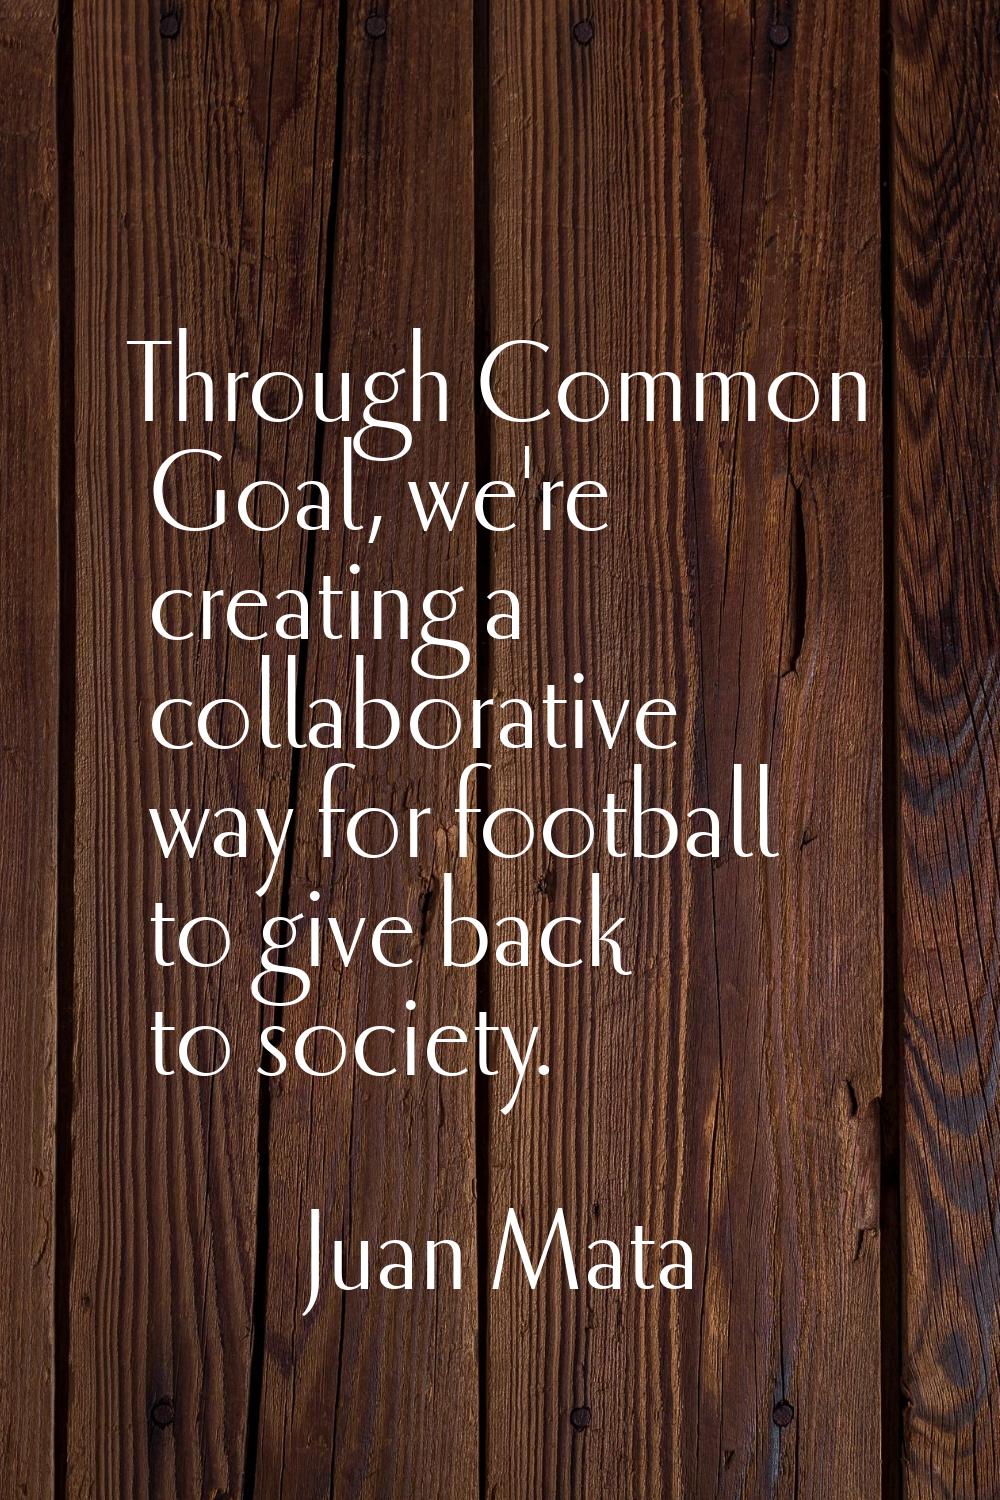 Through Common Goal, we're creating a collaborative way for football to give back to society.